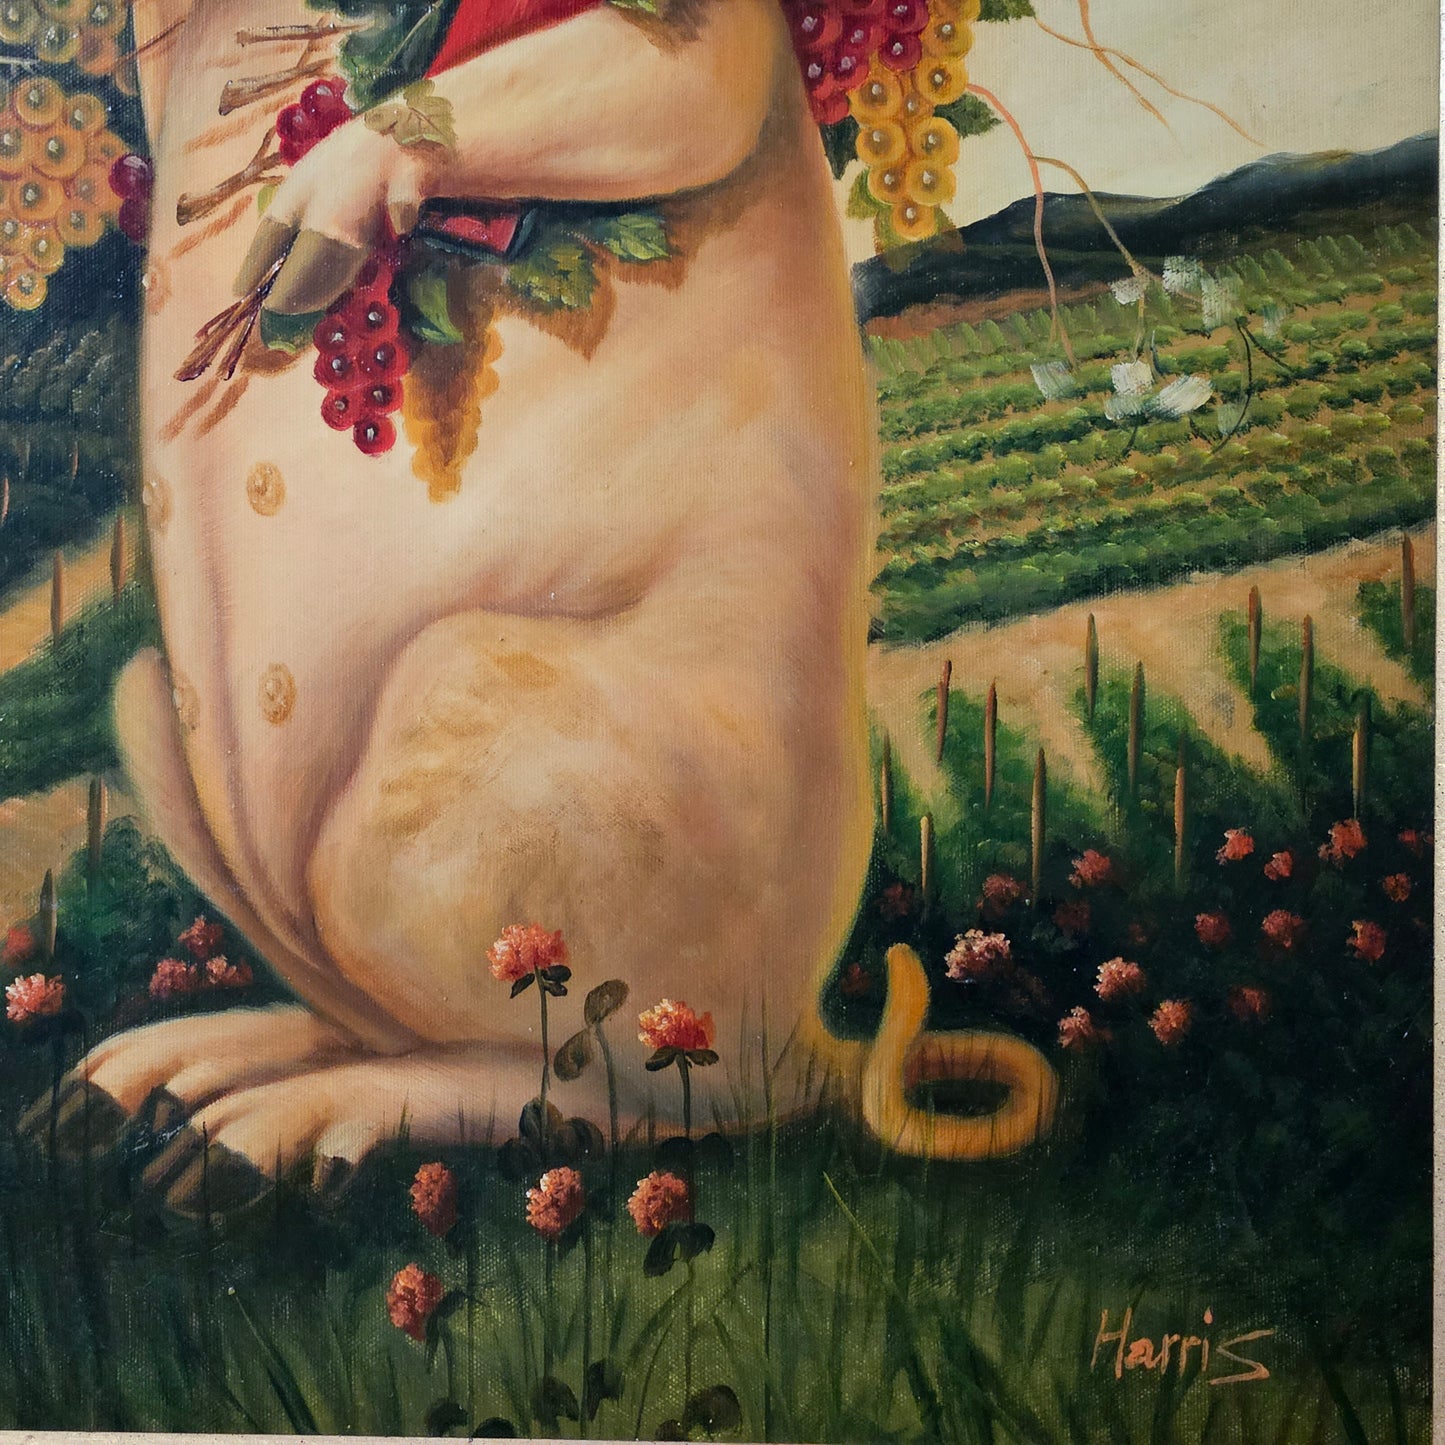 Decorator Painting of a Pig Holding a Wine Glass in a Vineyard - Signed Harris